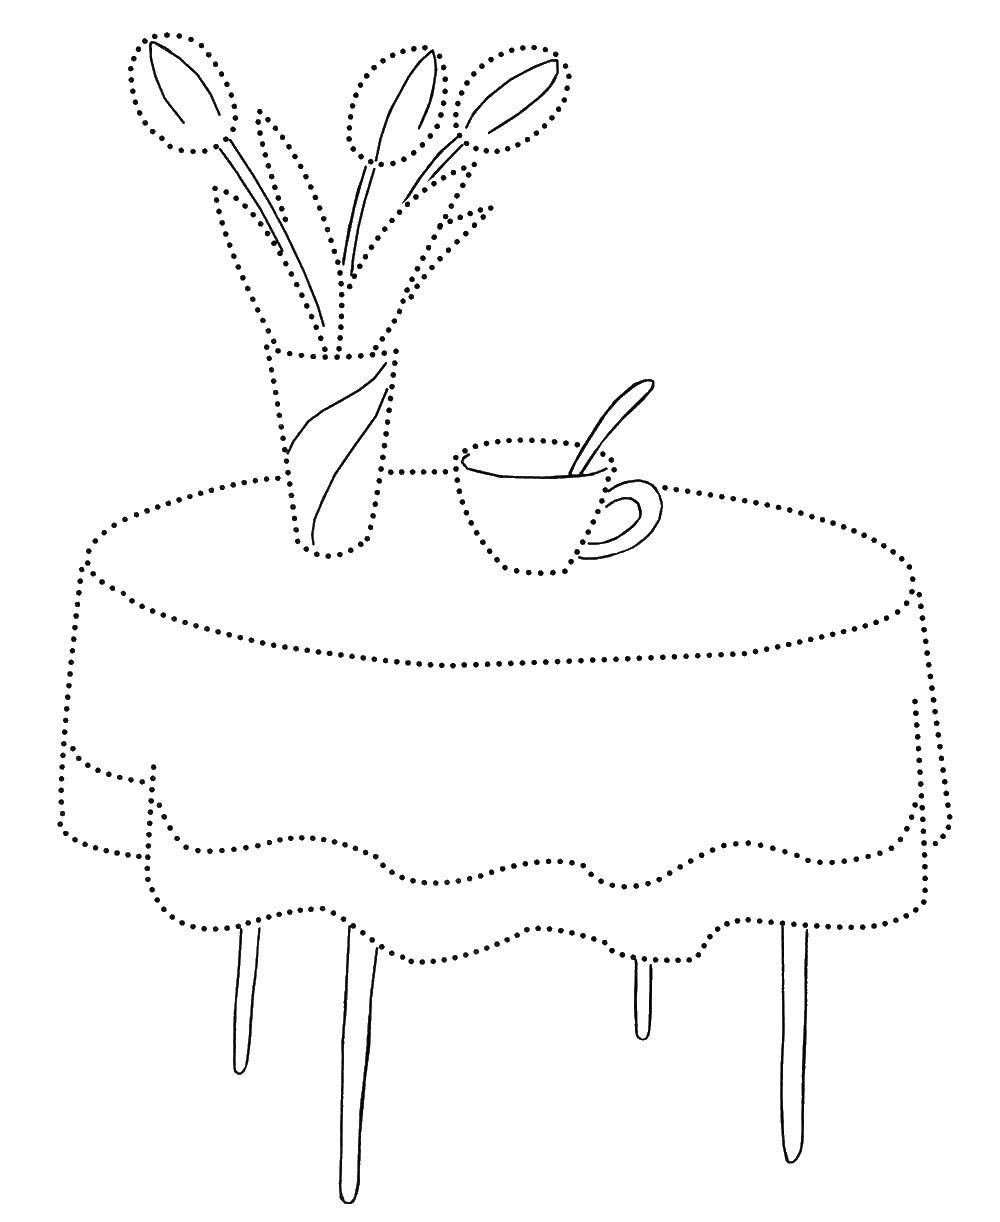 table setting coloring page